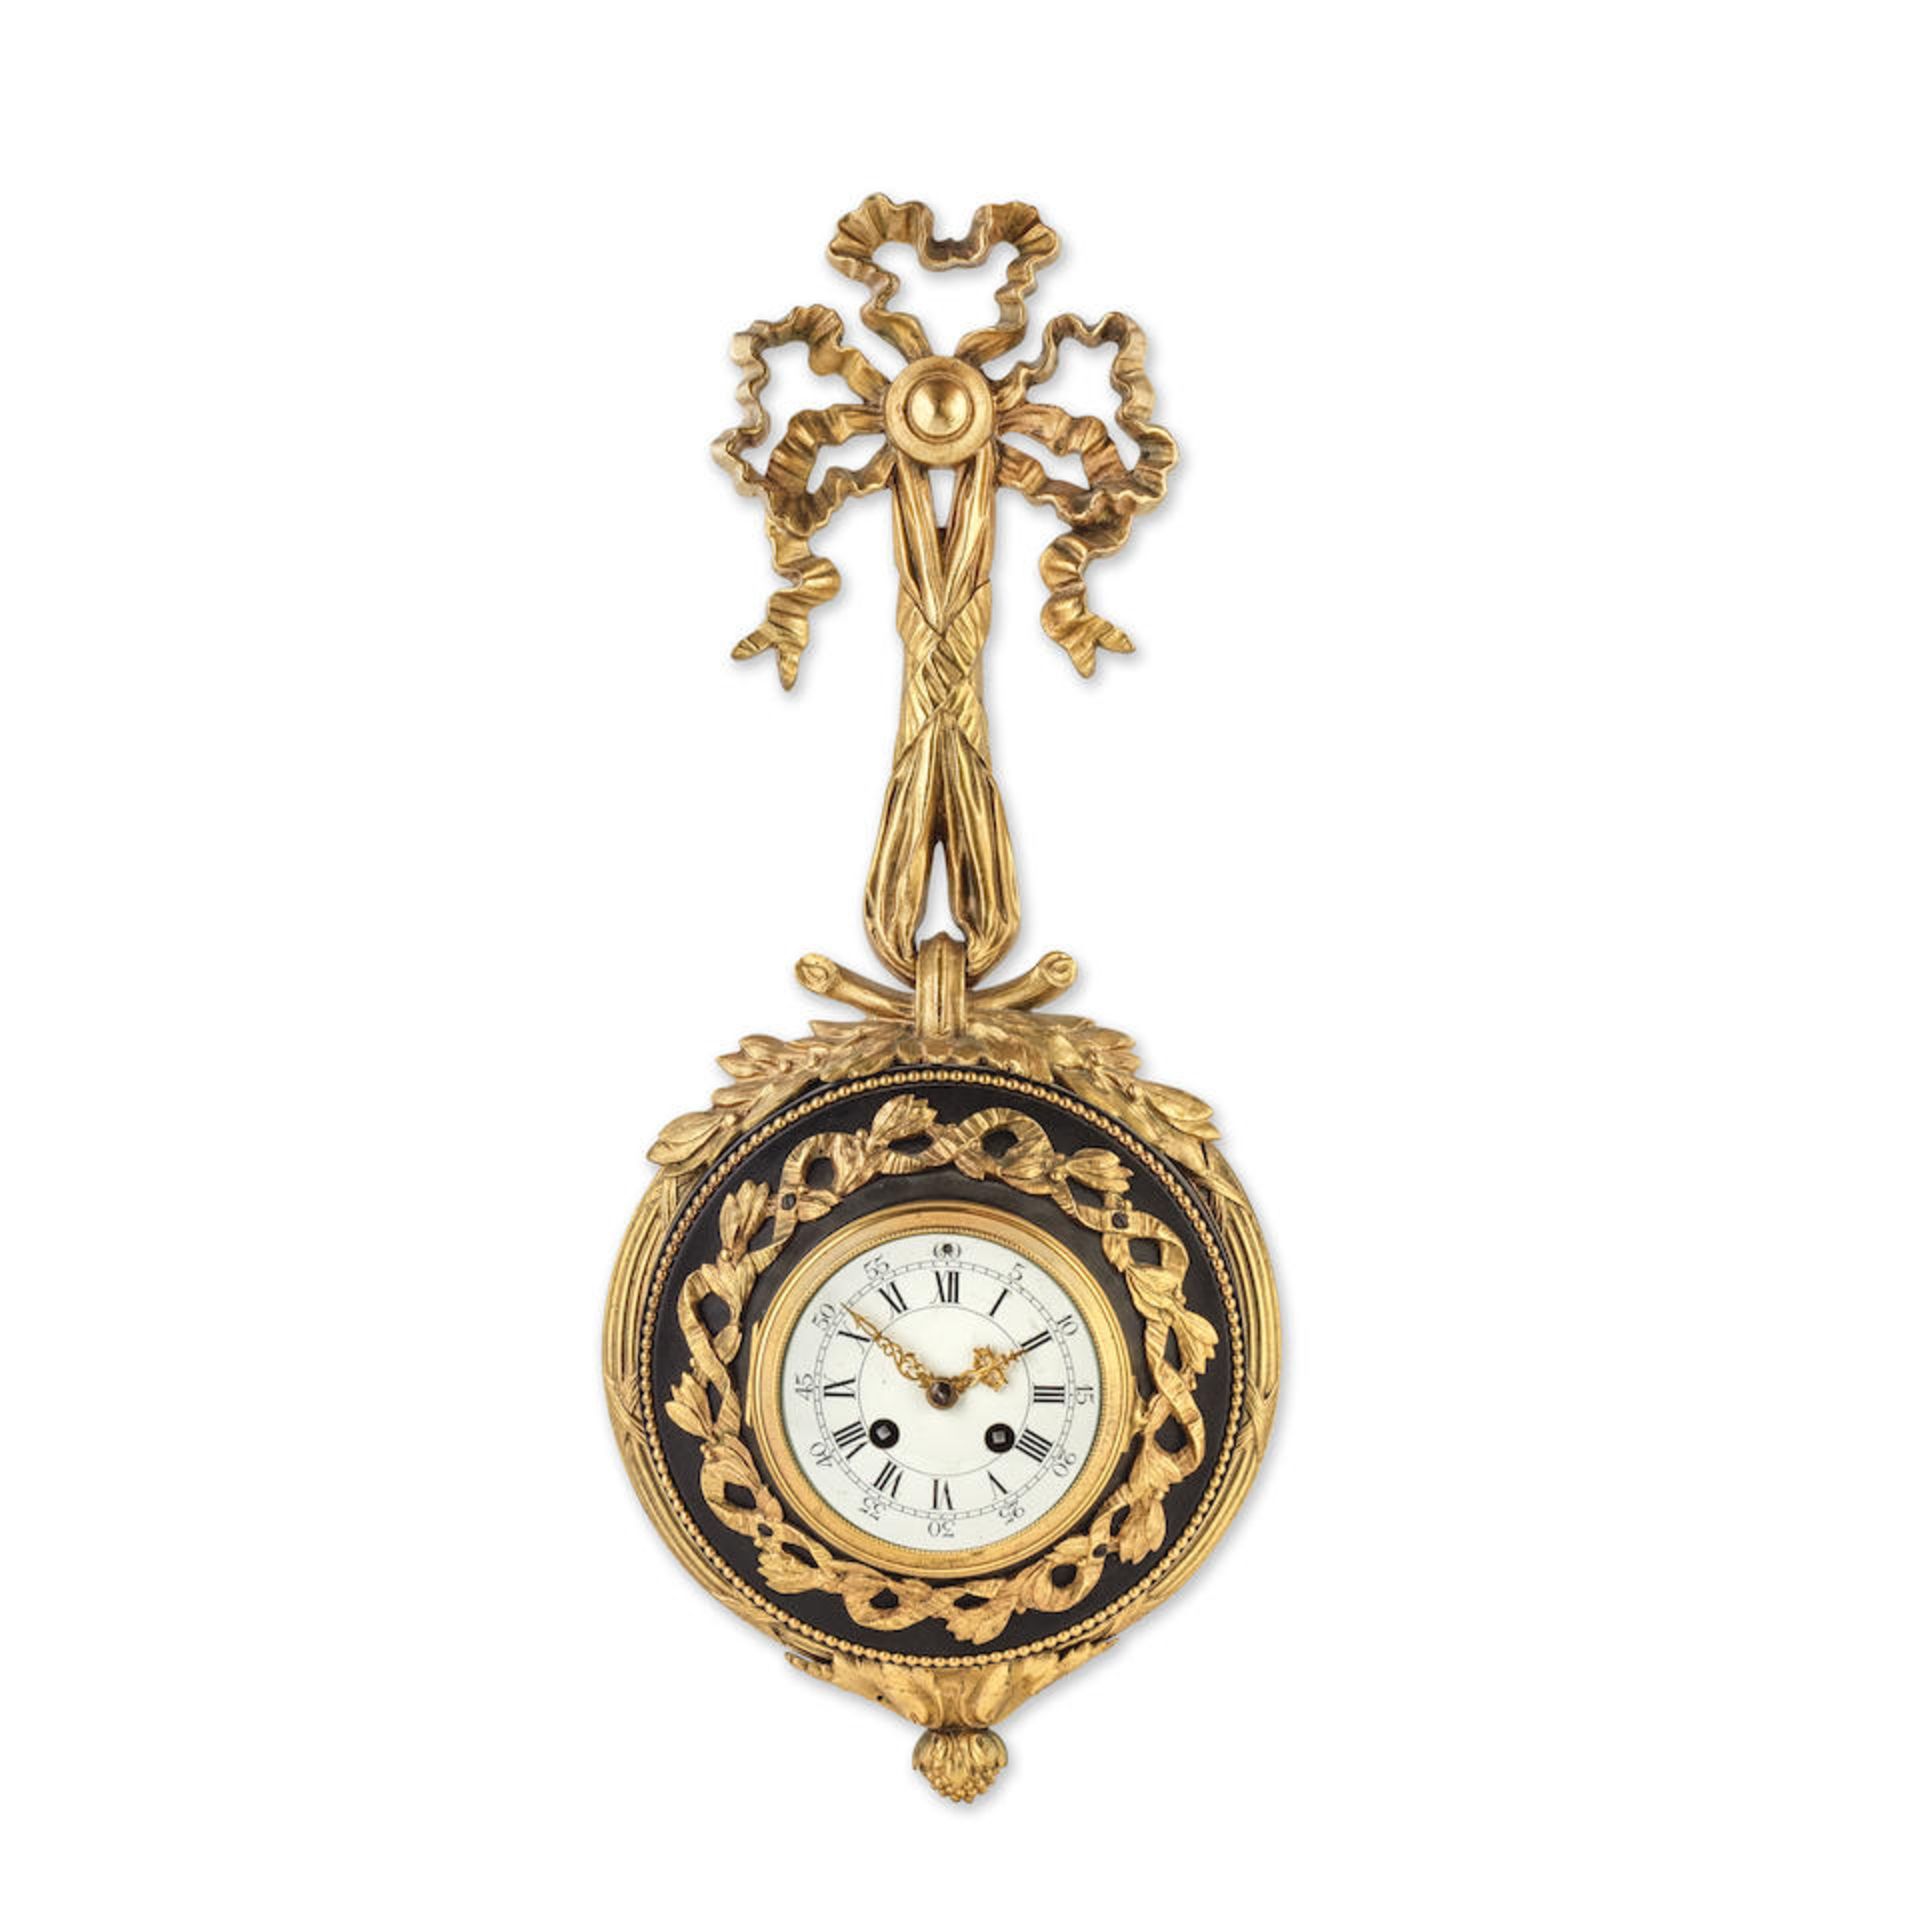 An early 20th century French gilt and patinated bronze cartel clock in the Louis XVI taste